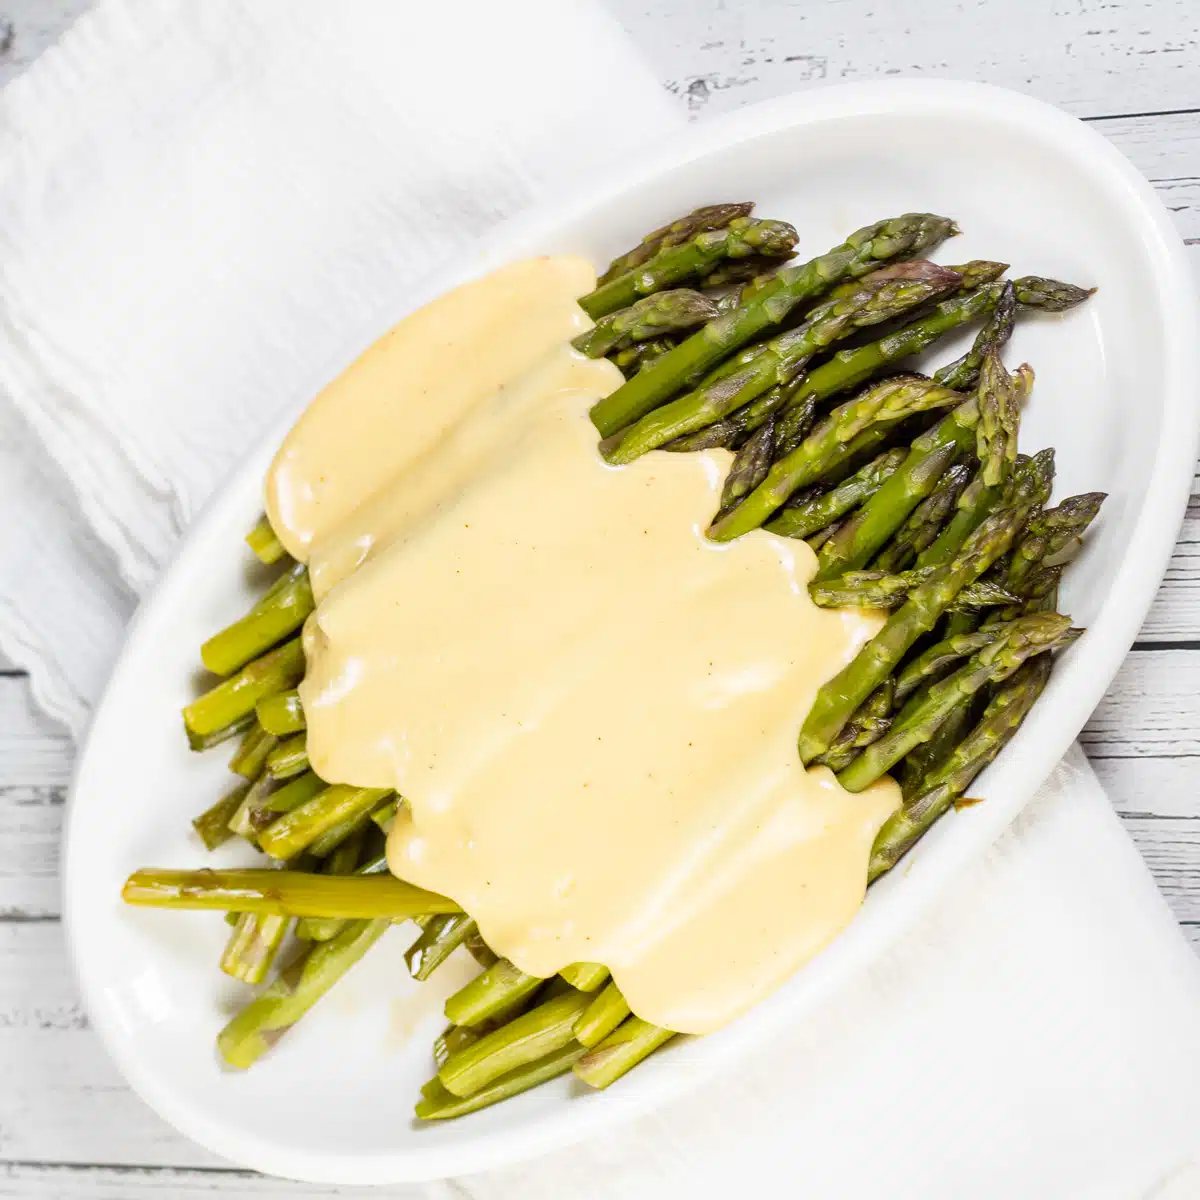 Square image showing cheese sauce on asparagus.